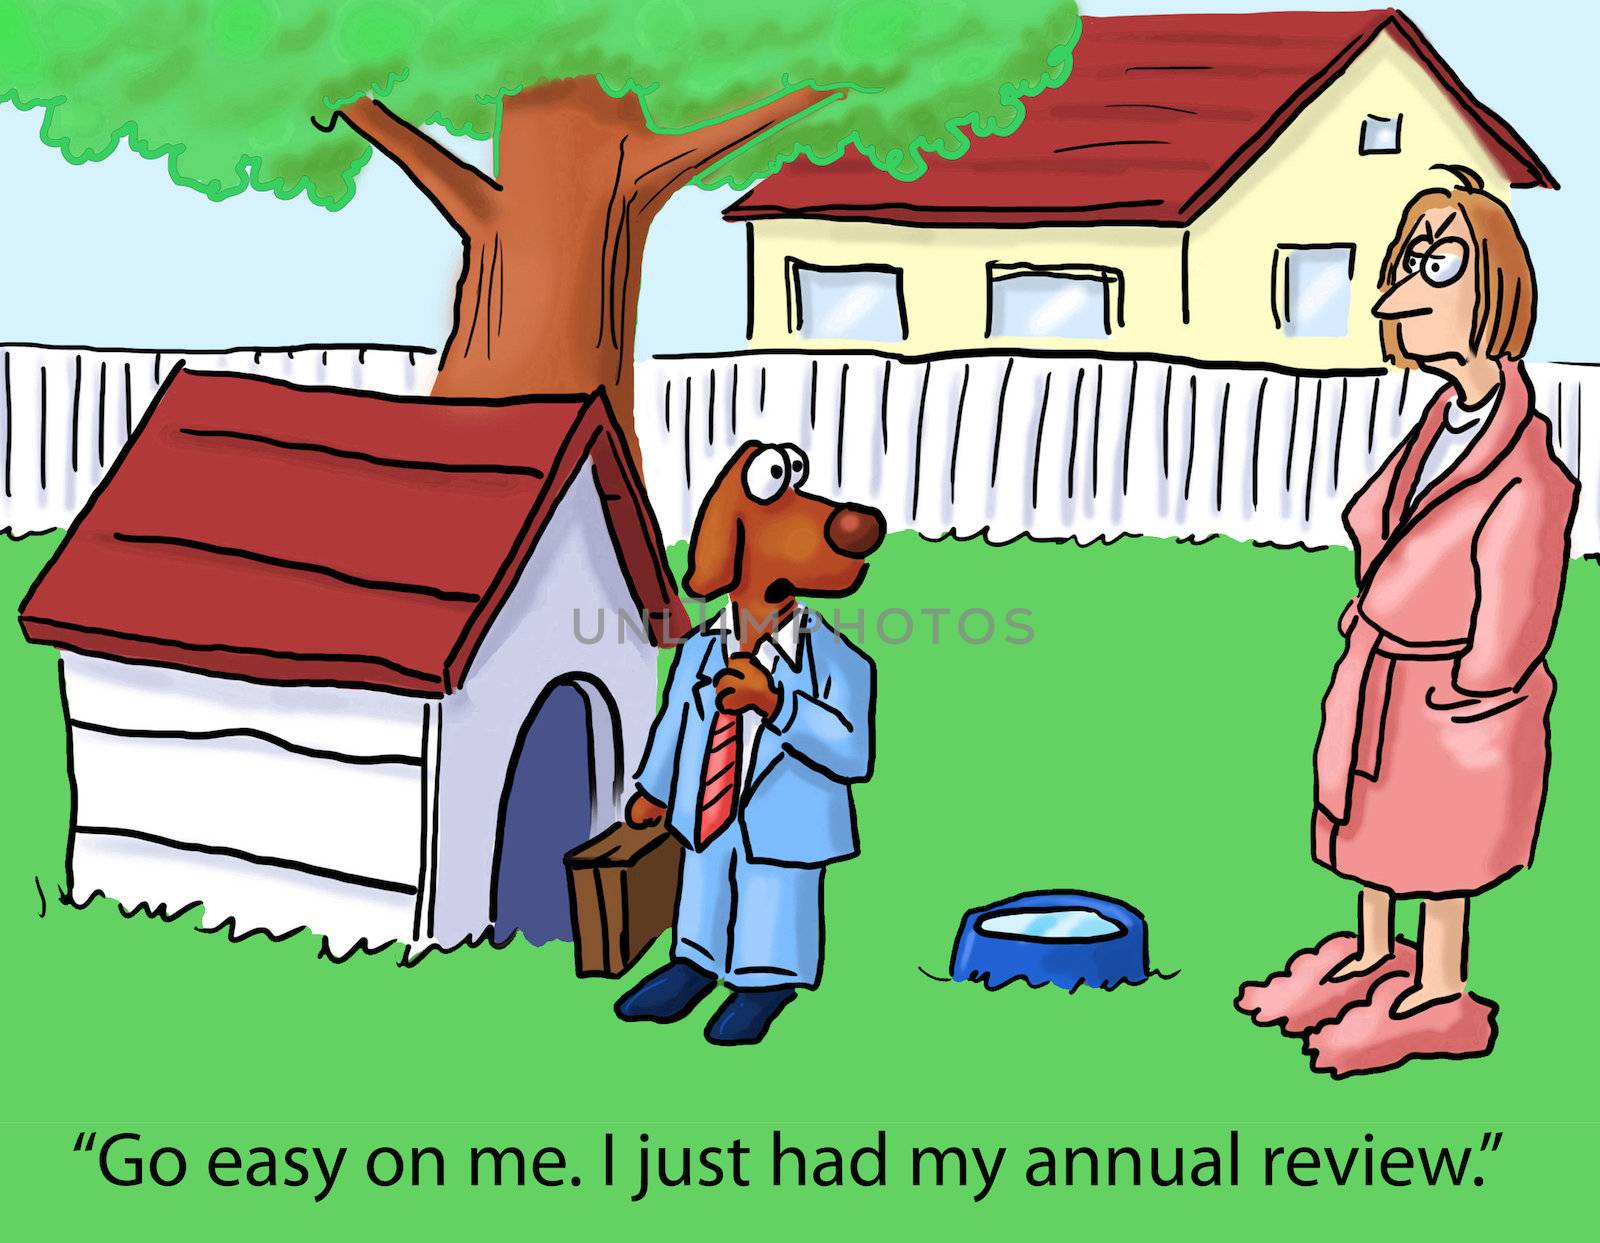 "Go easy on me.  I just had my annual review."